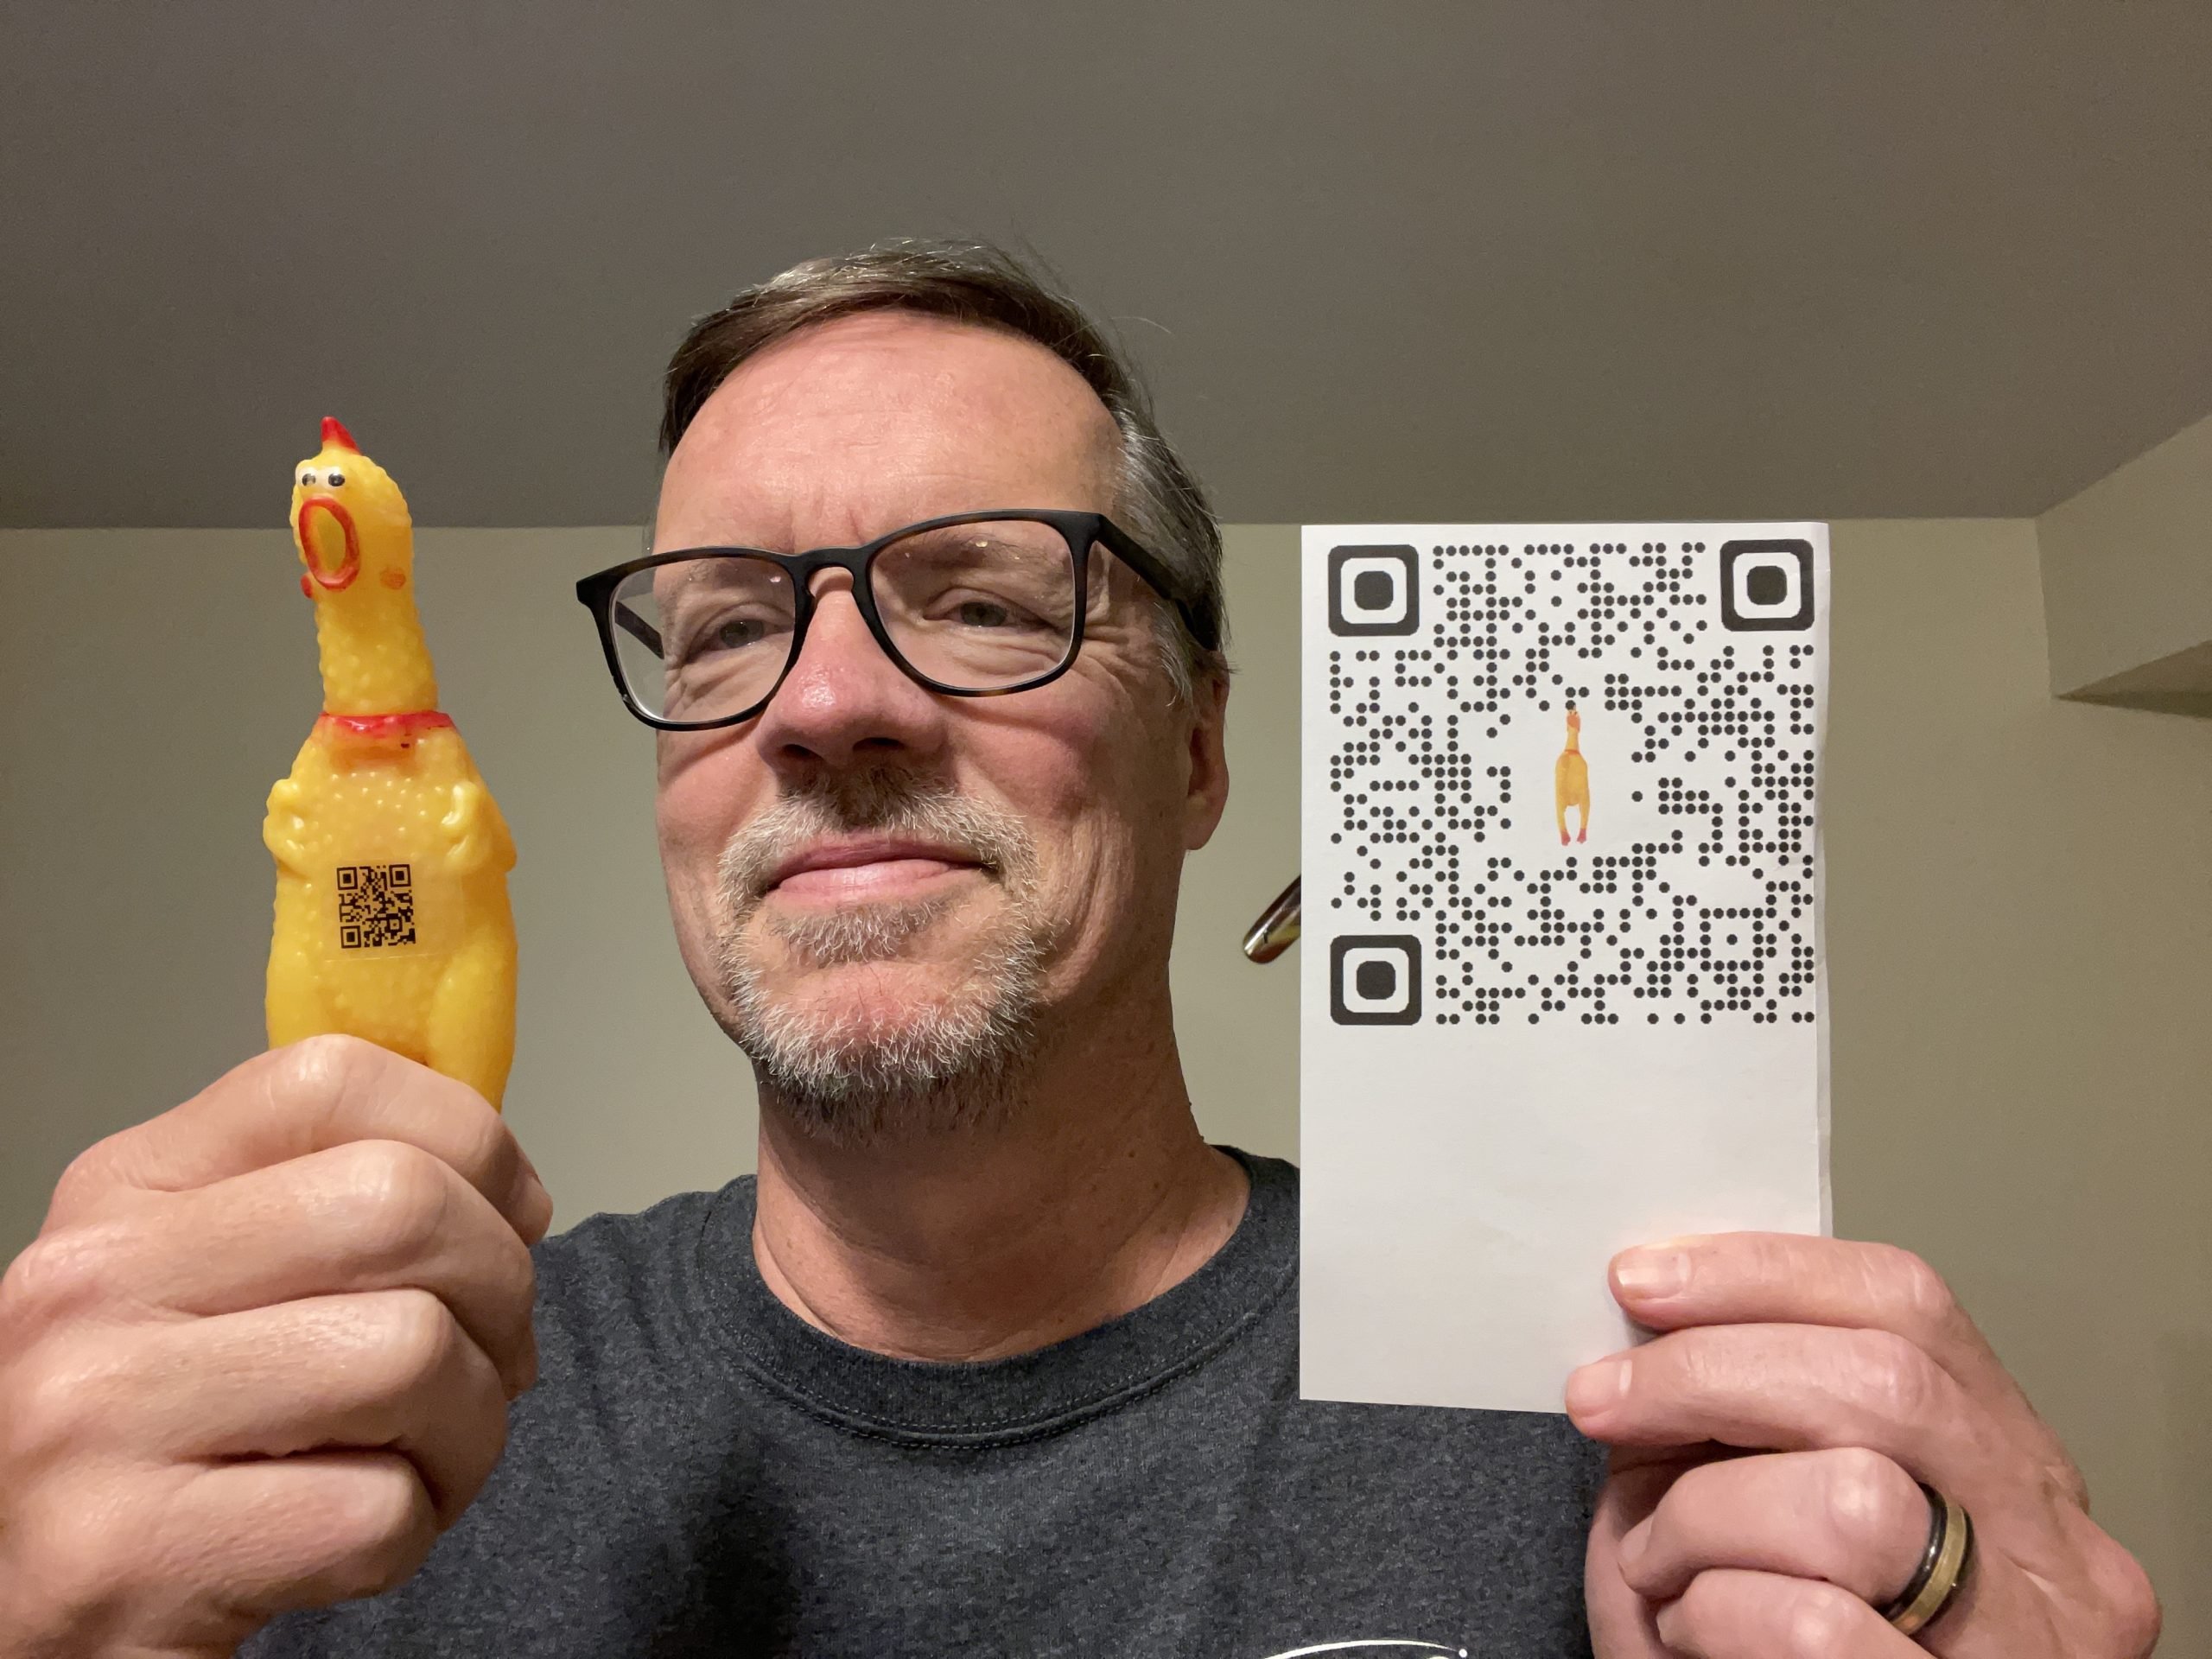 Linked In Post on QR codes